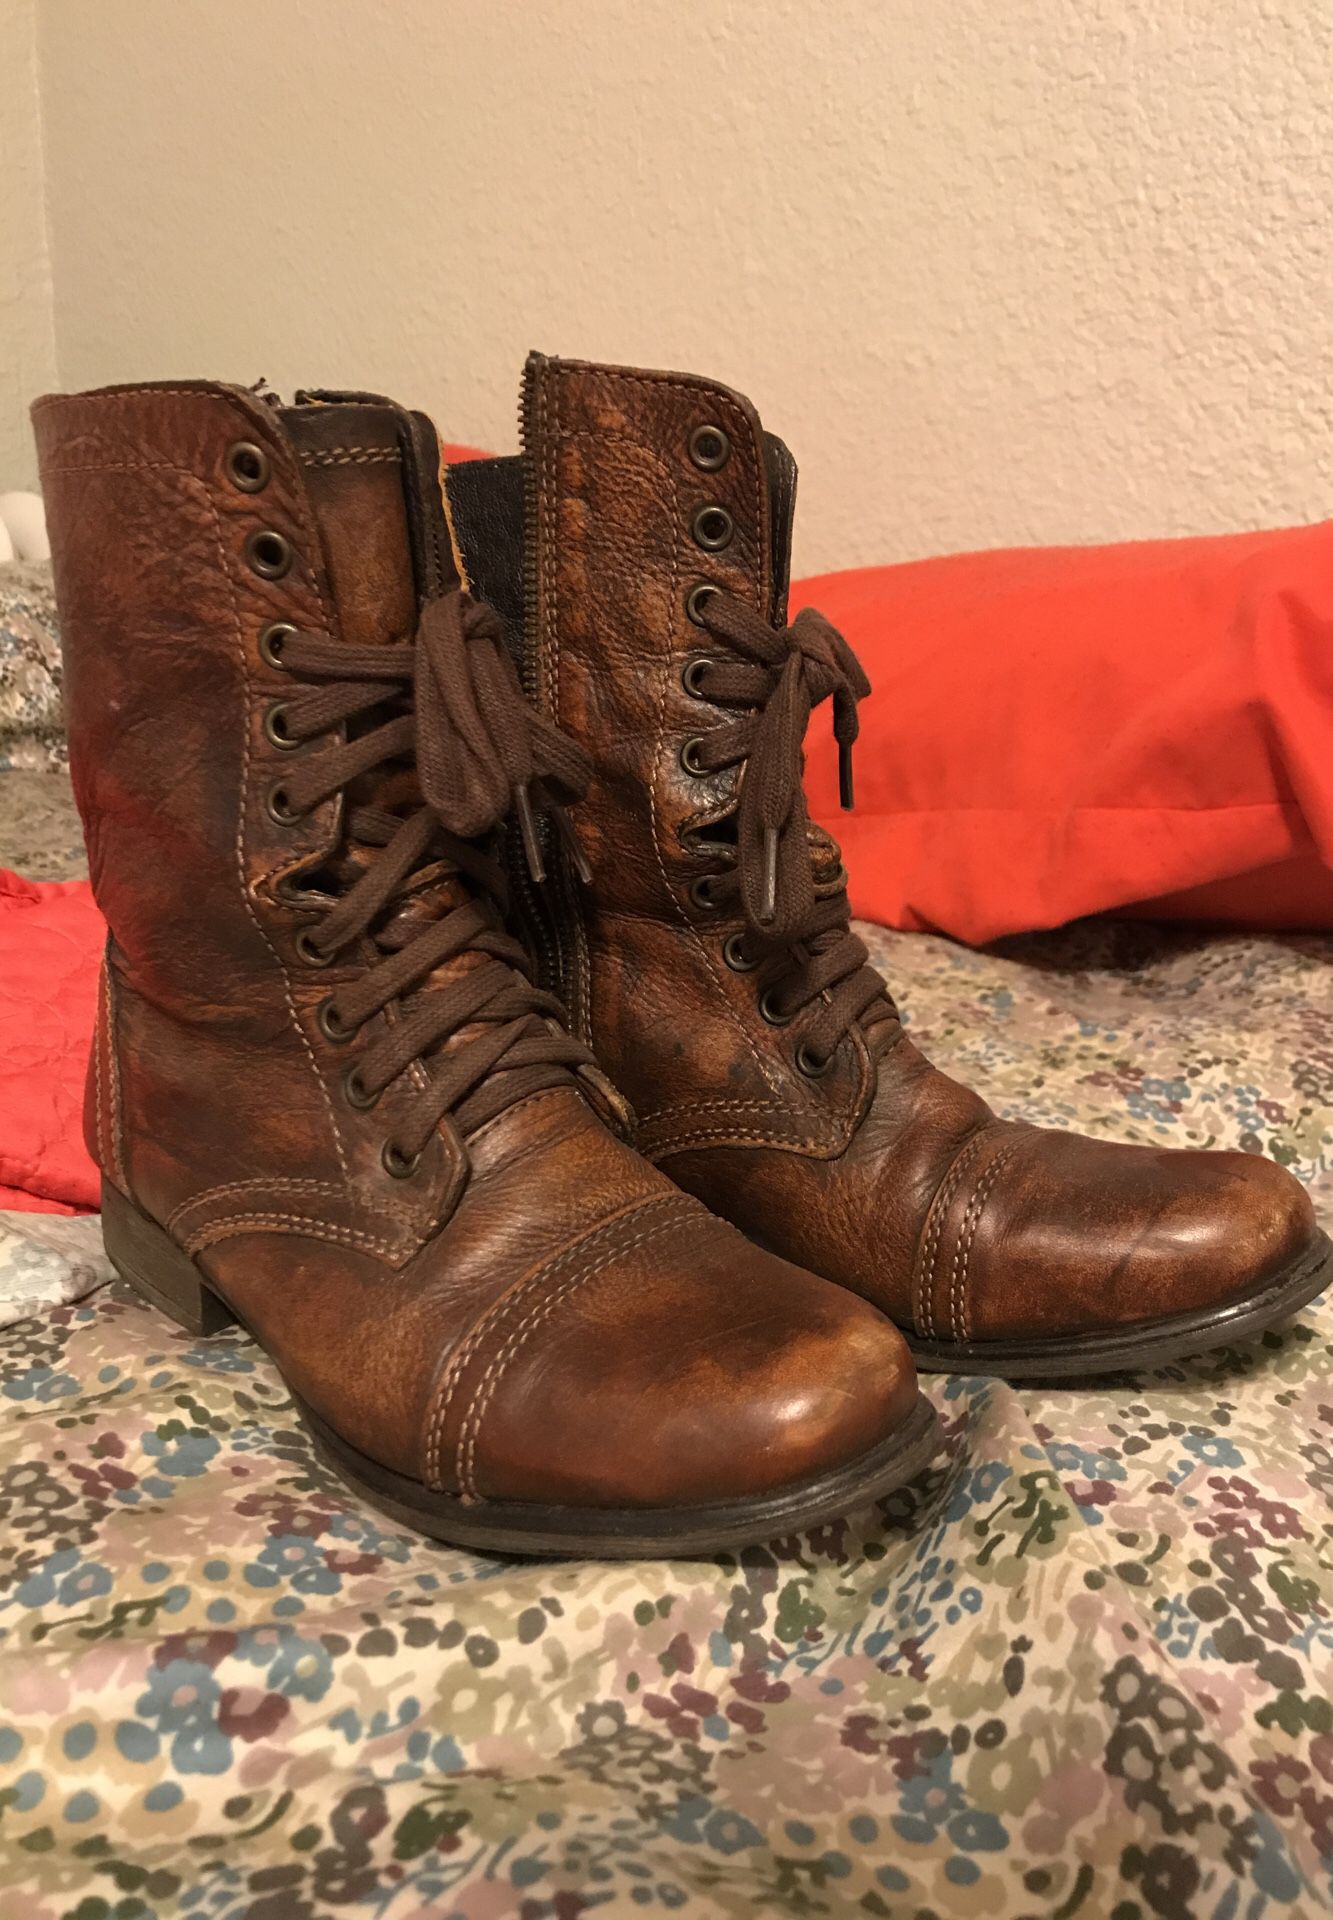 Steve Madden Troopa combat boots, size 7